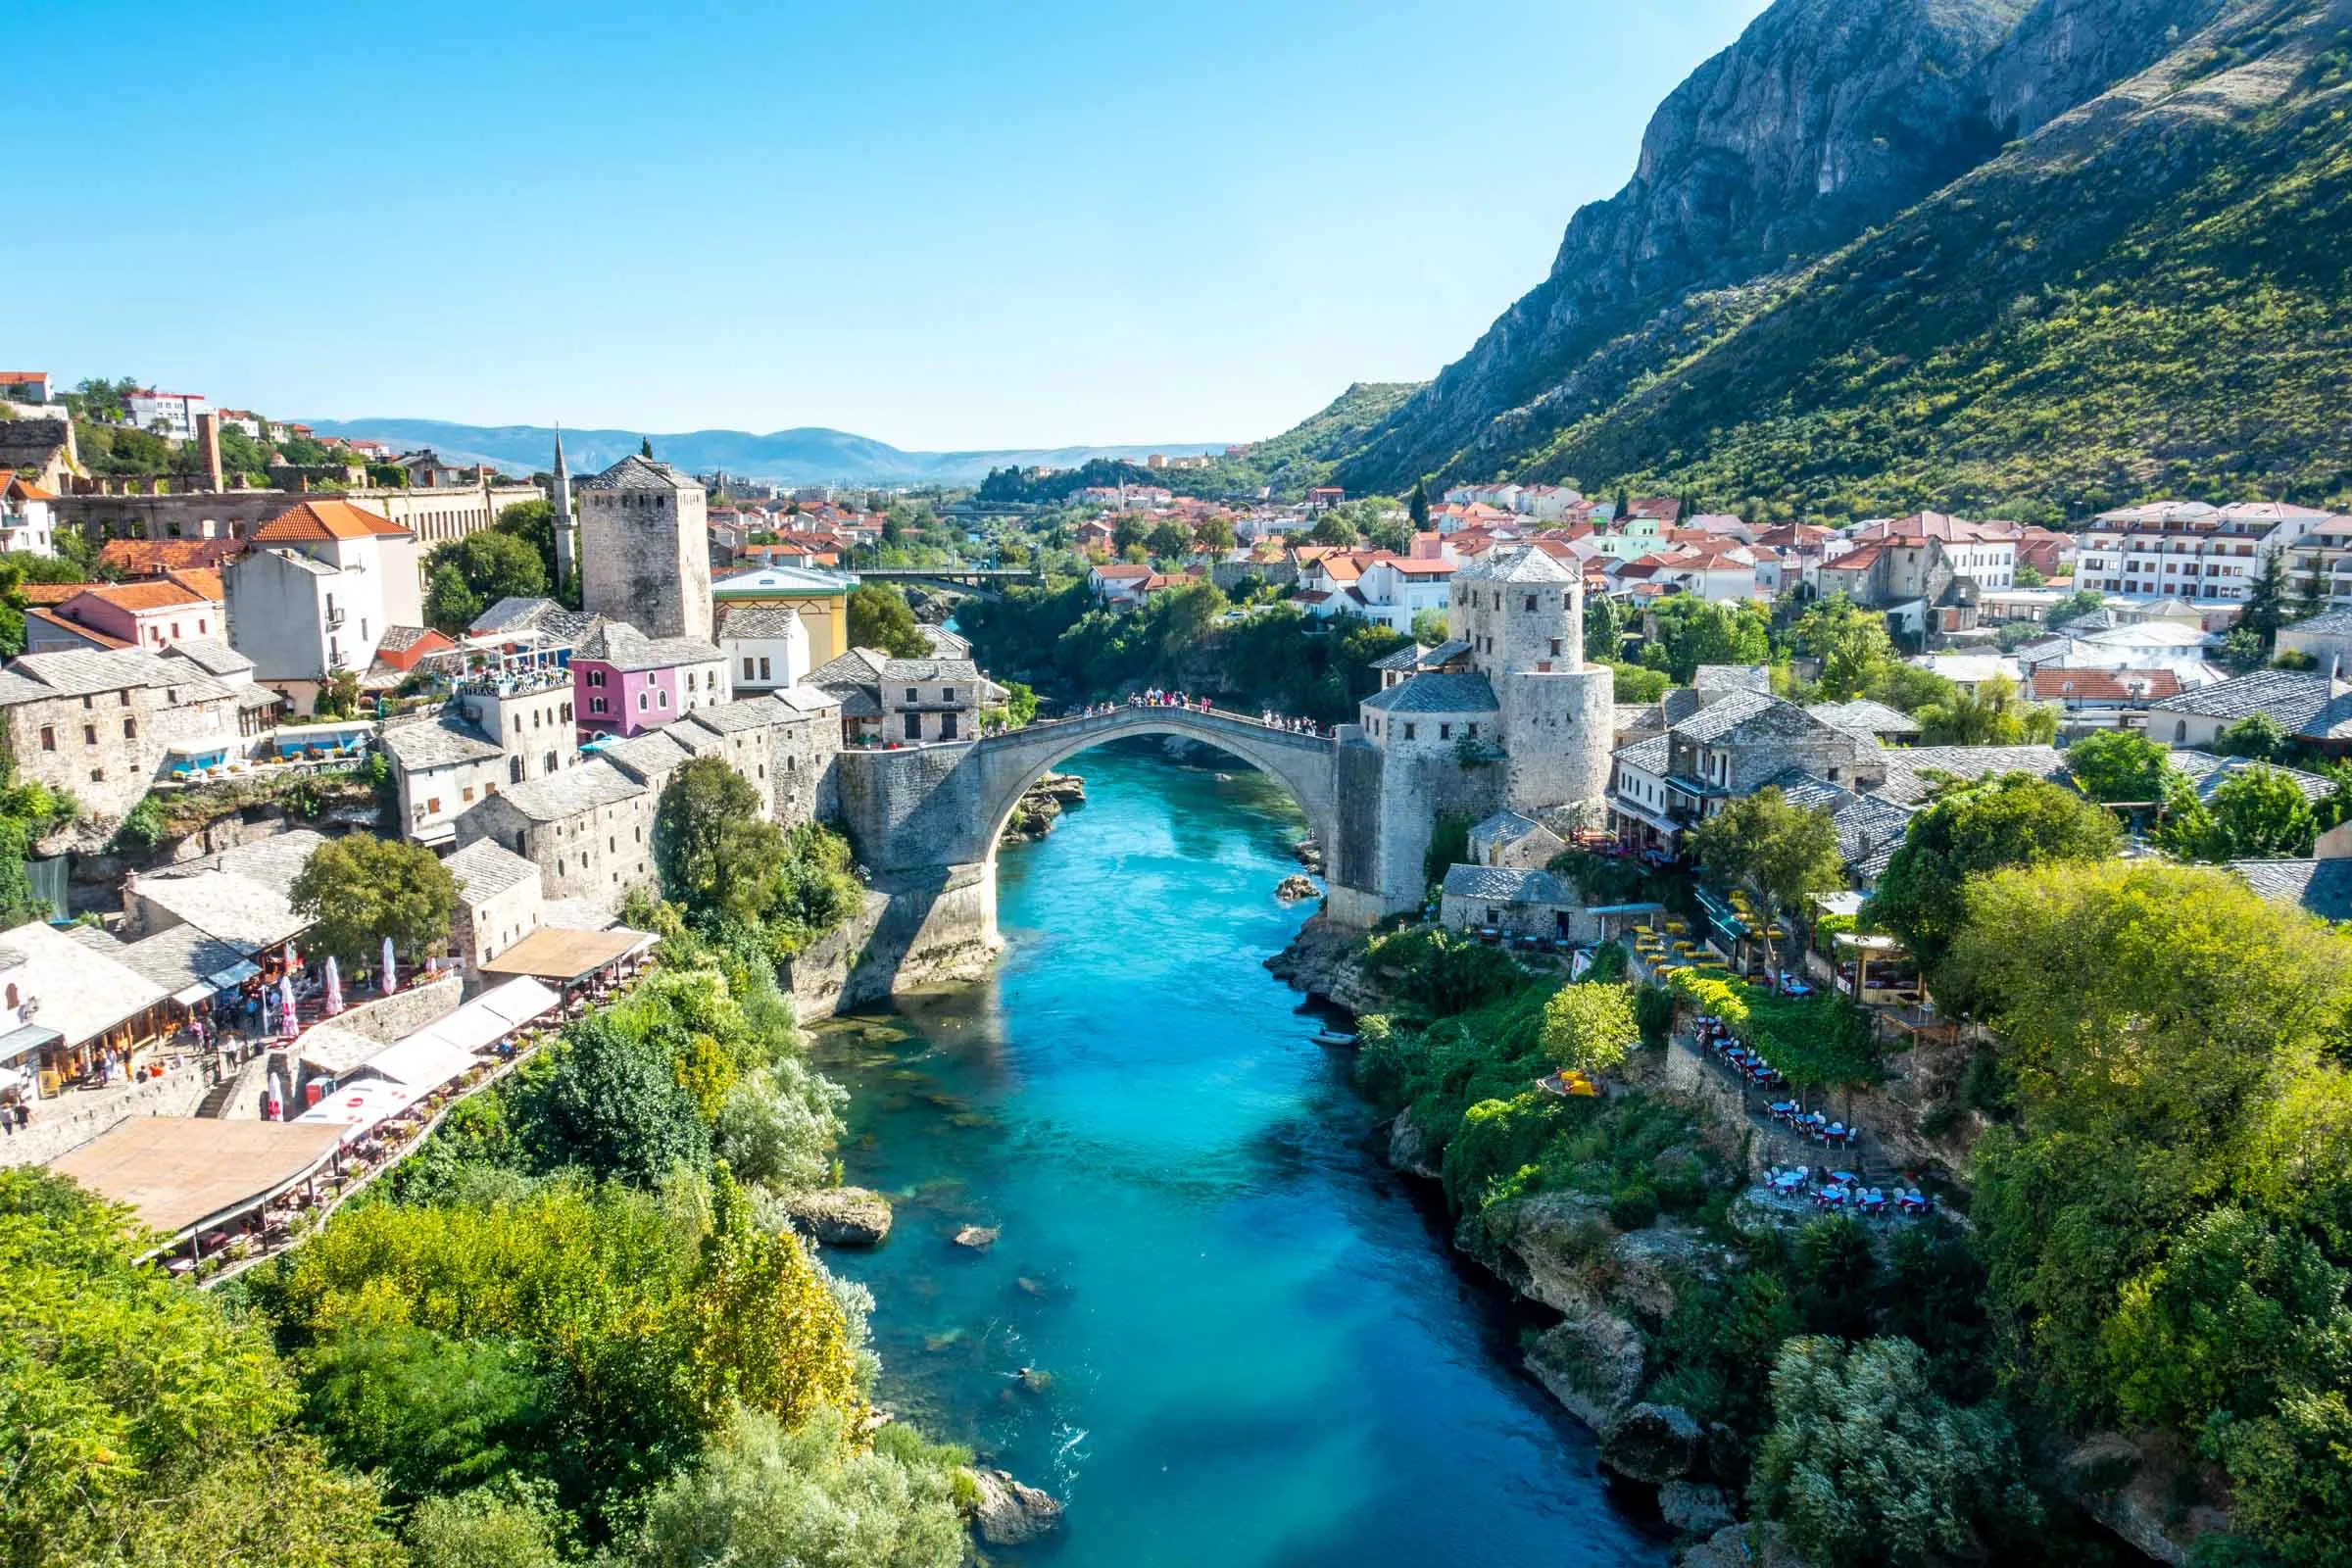 Stone bridge (Stari Most) over a river with buildings on both riverbanks  